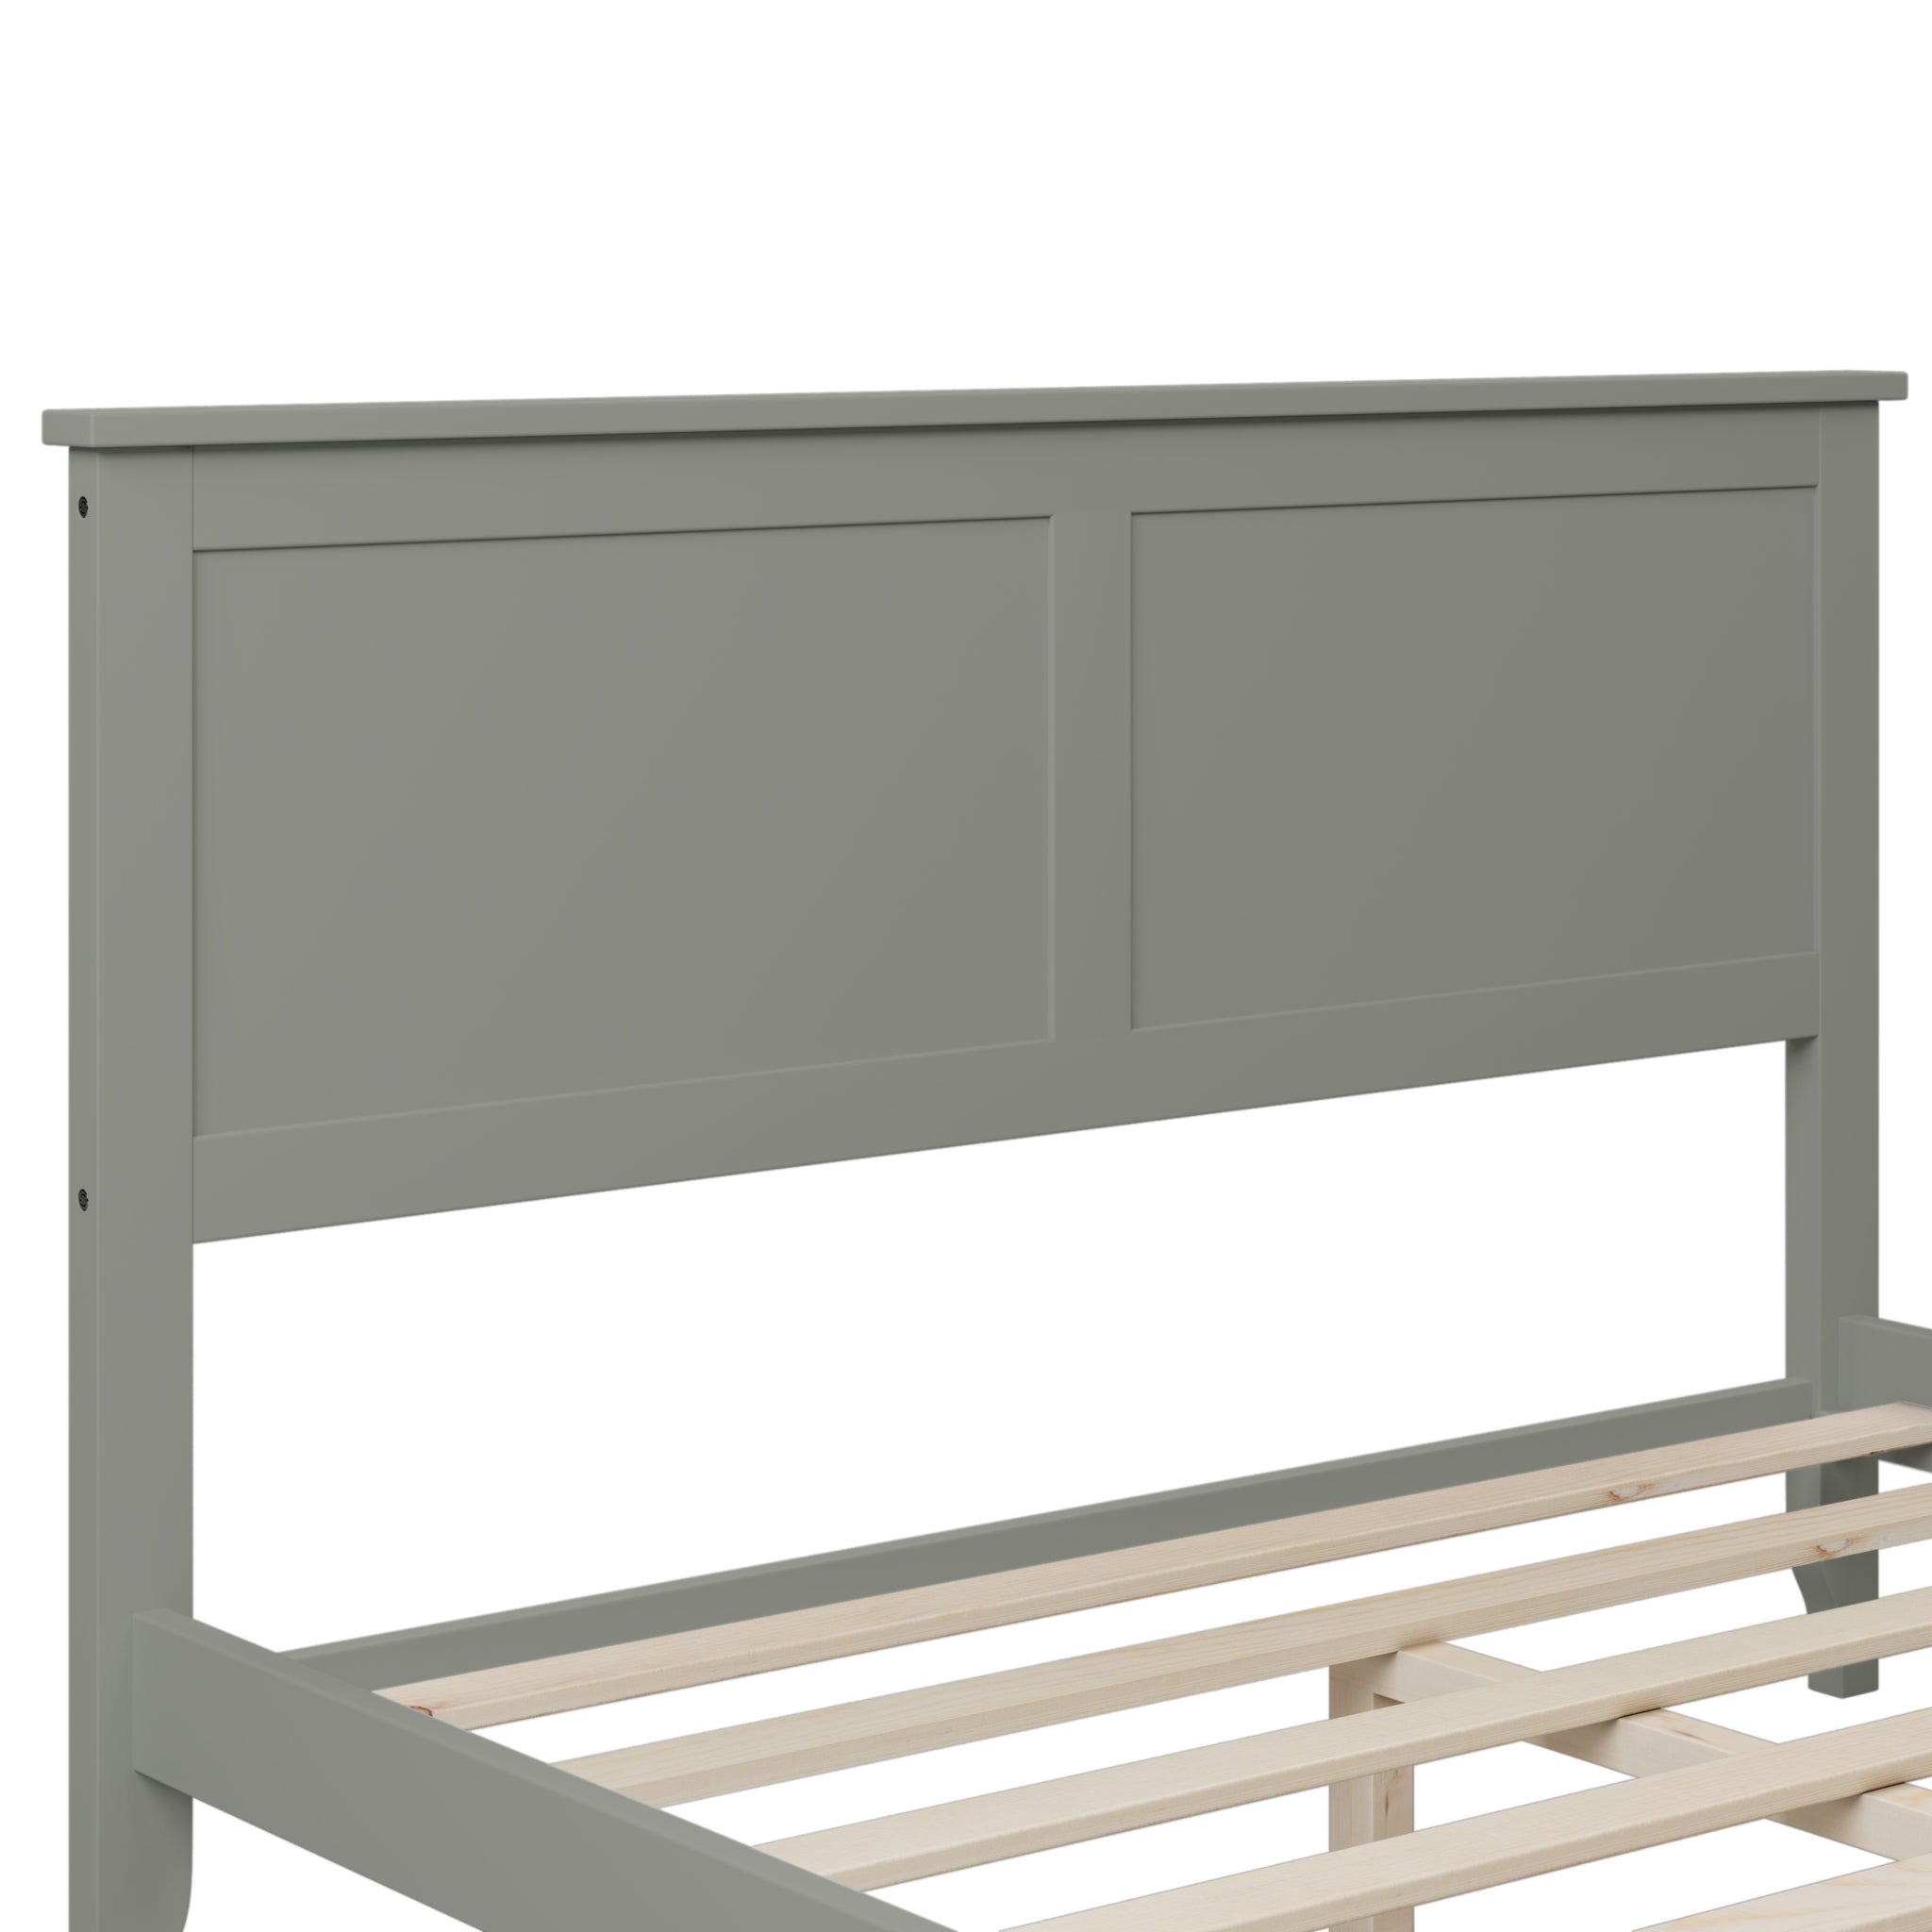 Modern Gray Solid Wood Full Platform Bed old gray-solid wood